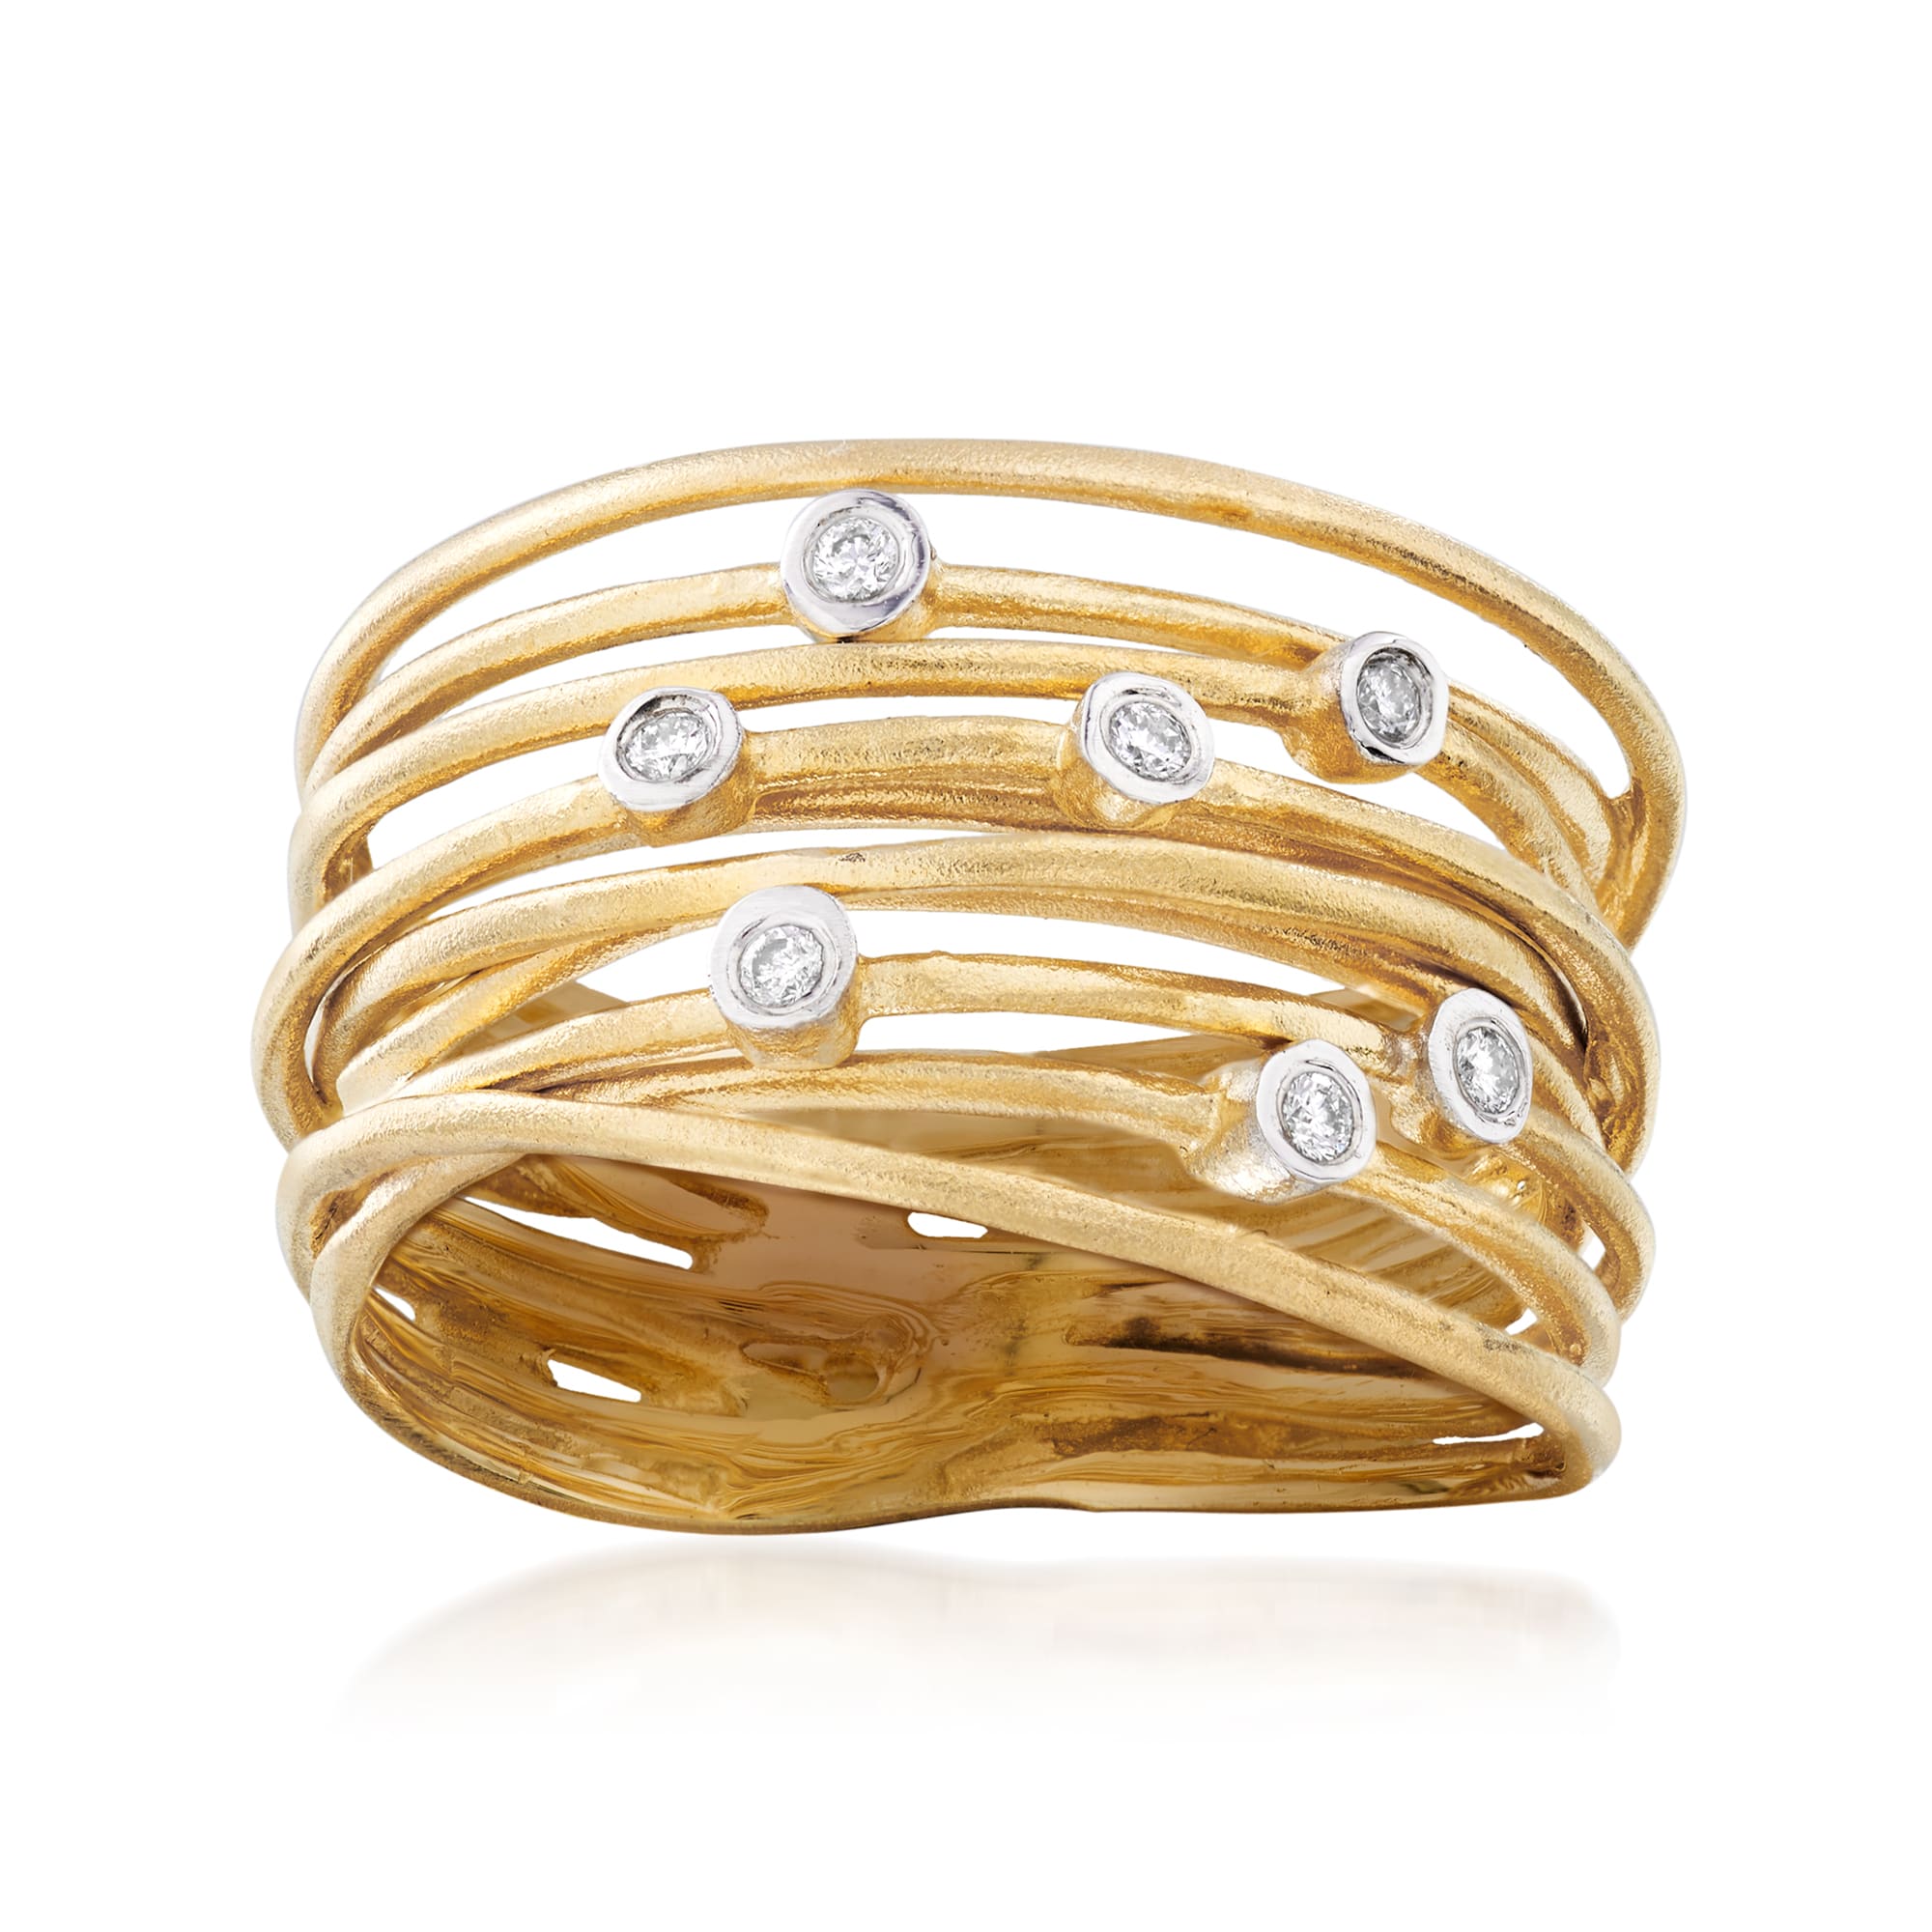 14kt Yellow Gold Multi-Row Ring with Diamond Accents | Ross-Simons